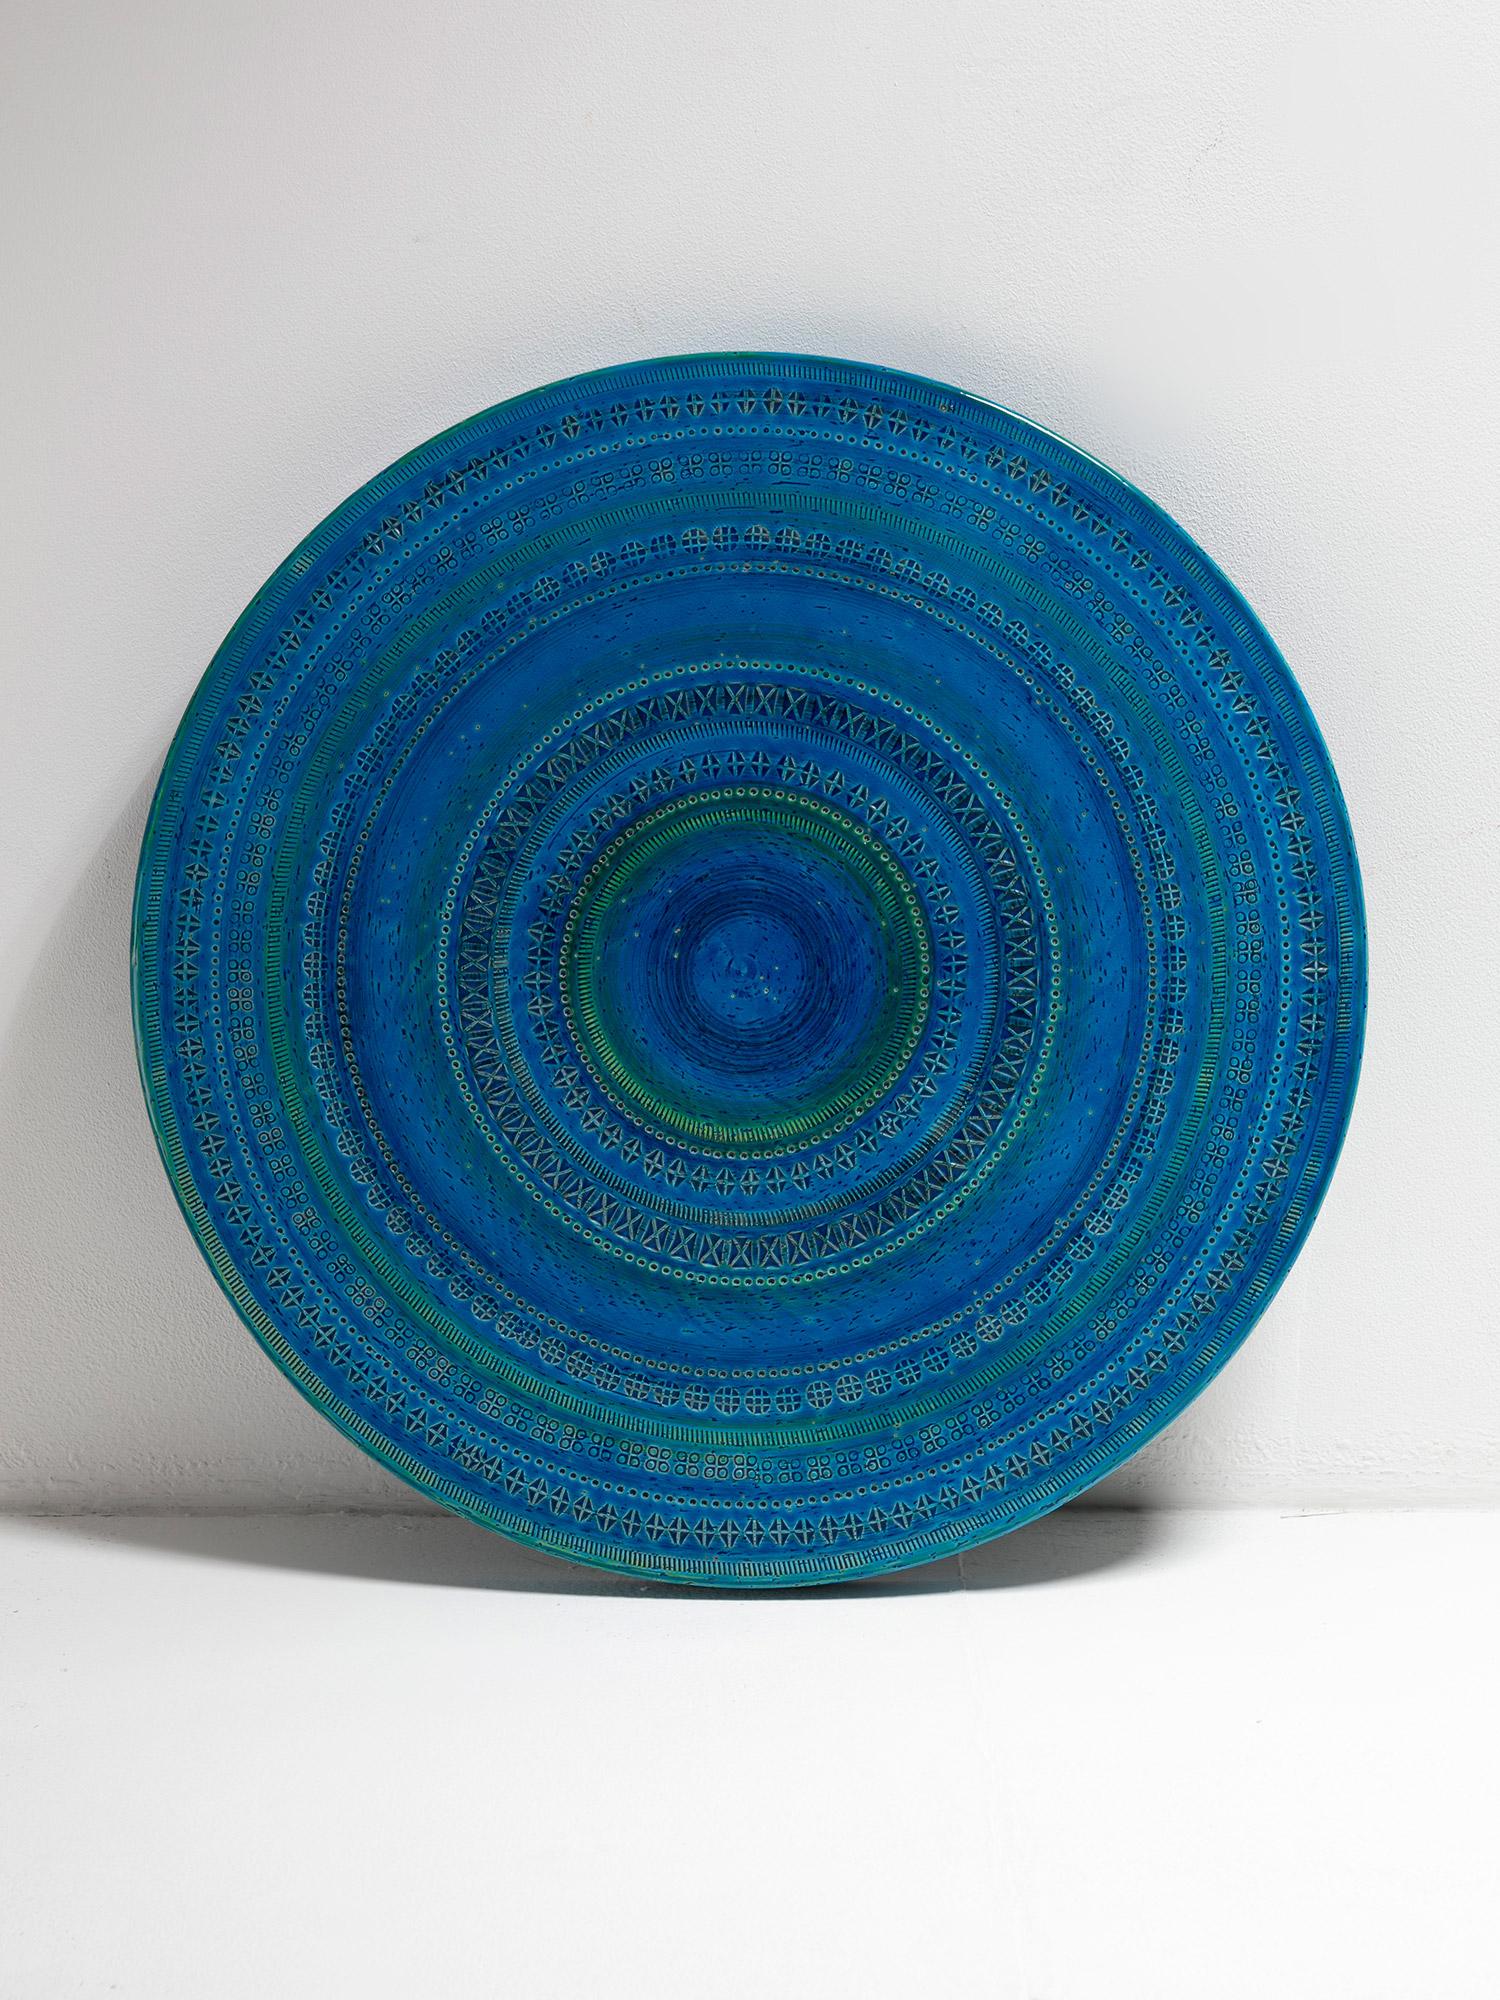 Scarce decorative wall plate by Aldo Londi for Bitossi.
The large piece features typical engraved detailed decoration of this Rimini Blu design.